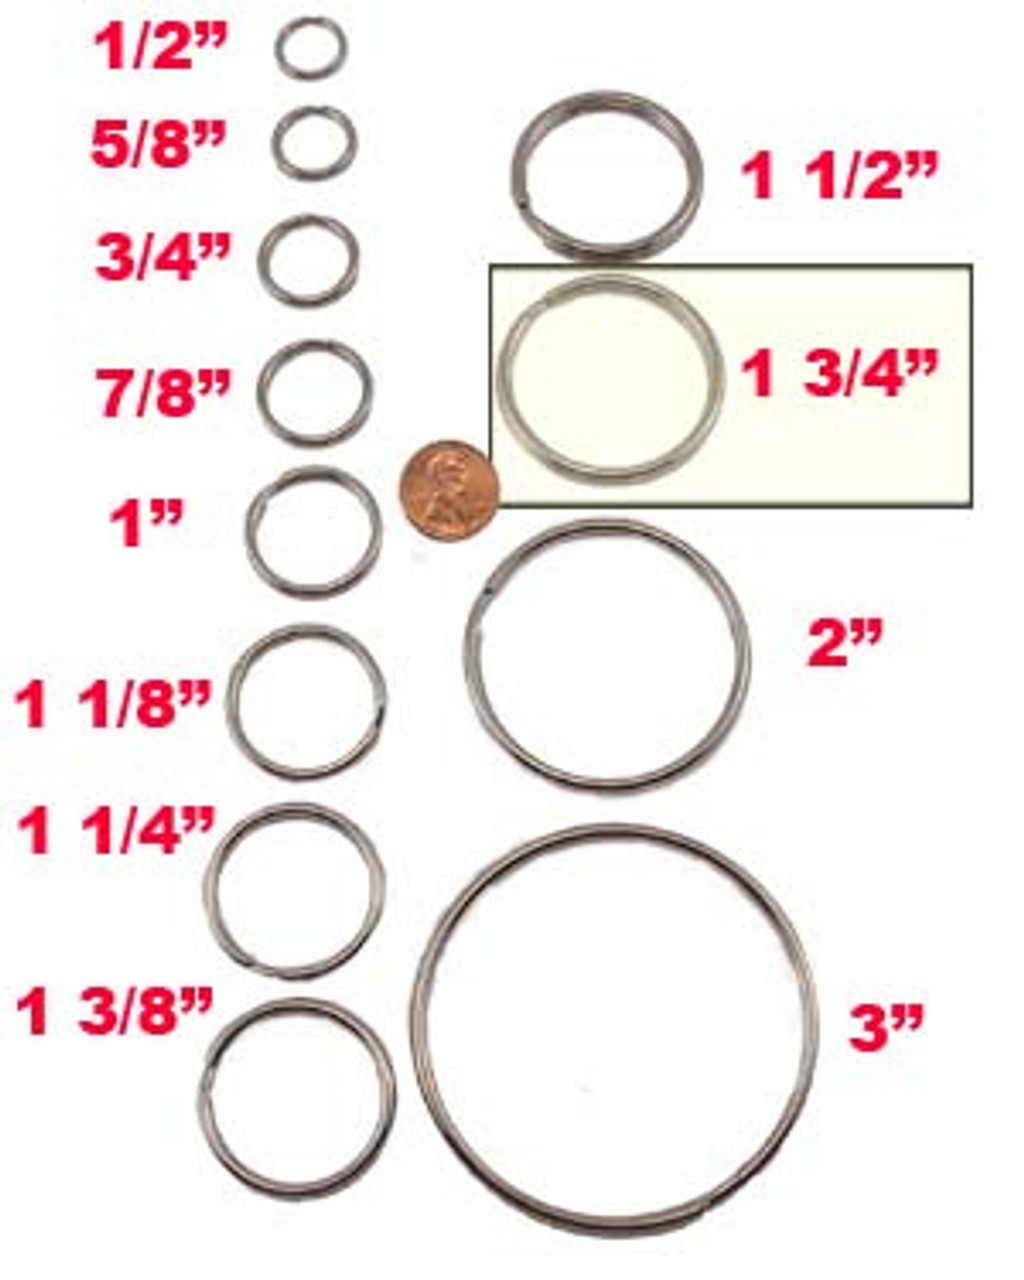 Shop for and Buy Plain Wire Key Ring 3/4 Inch-Bulk Pack of 1000 at .  Large selection and bulk discounts available.